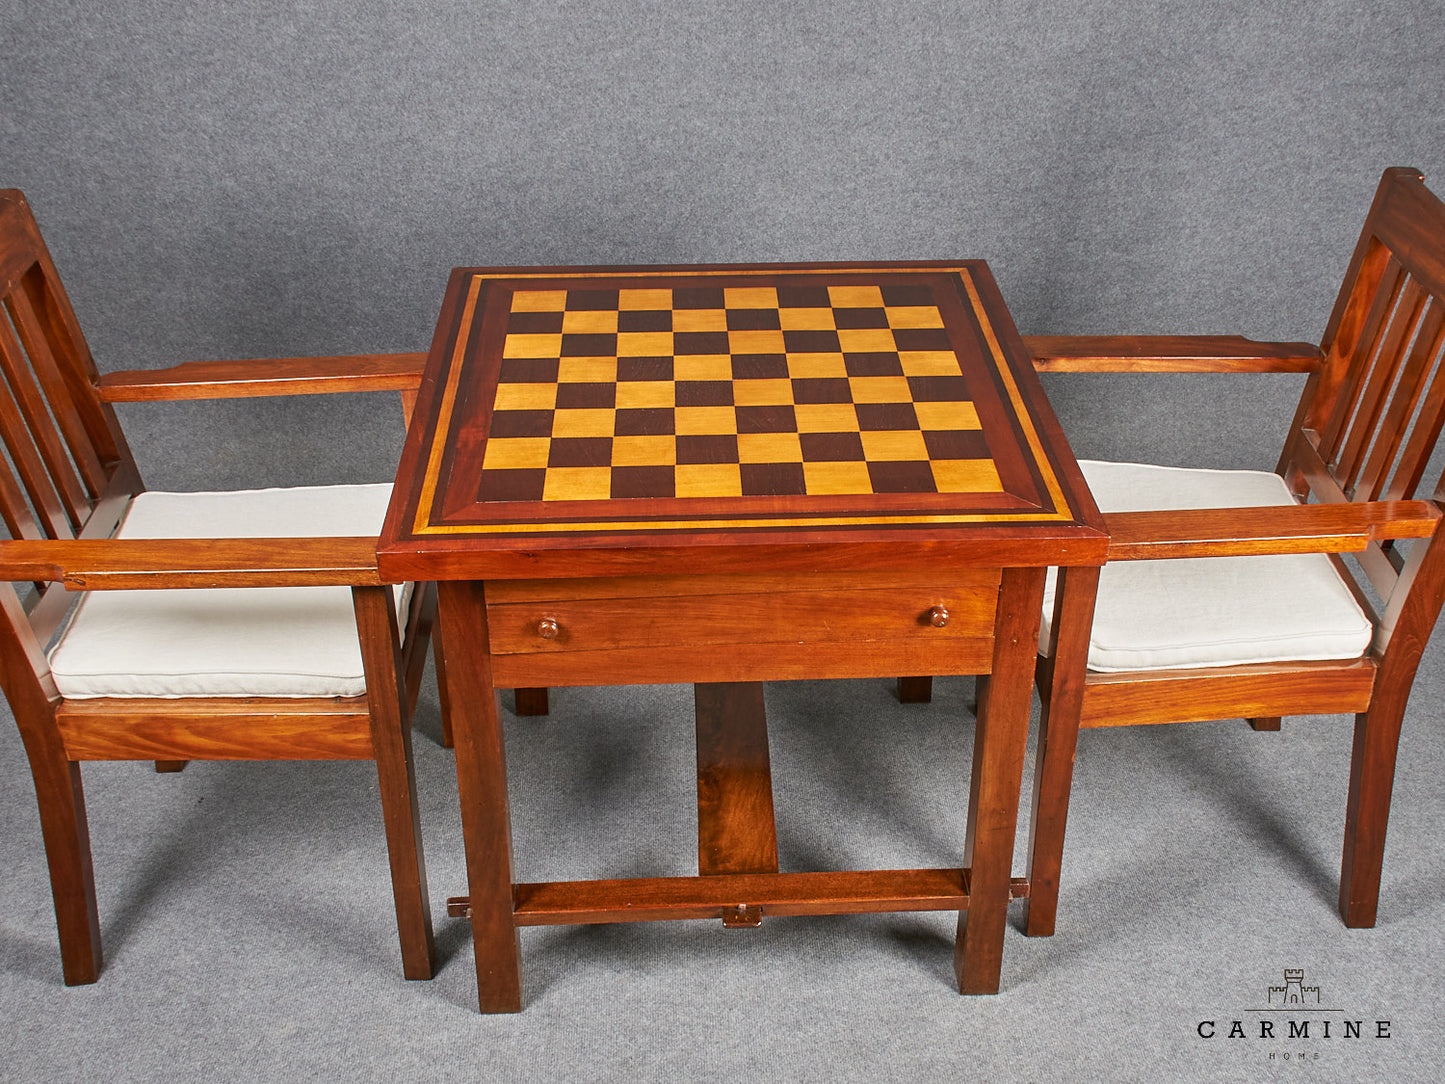 Chess table with 2 chairs